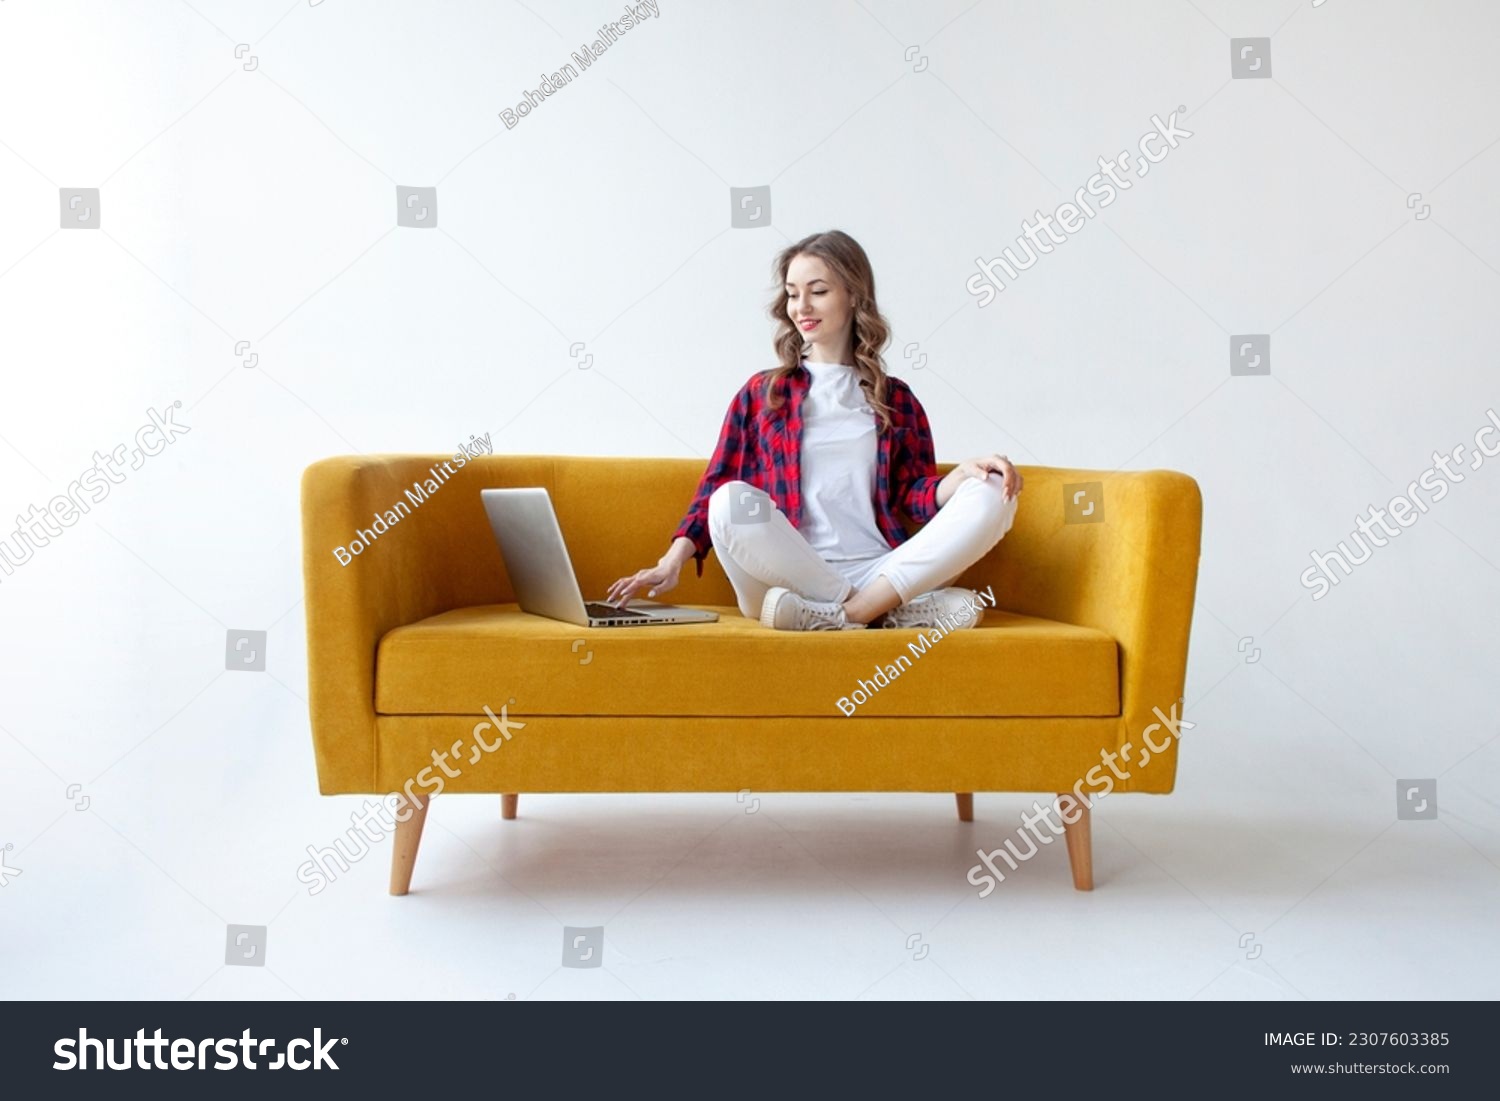 young cute girl uses laptop on comfortable soft sofa, woman types online on computer on yellow couch on white isolated background #2307603385